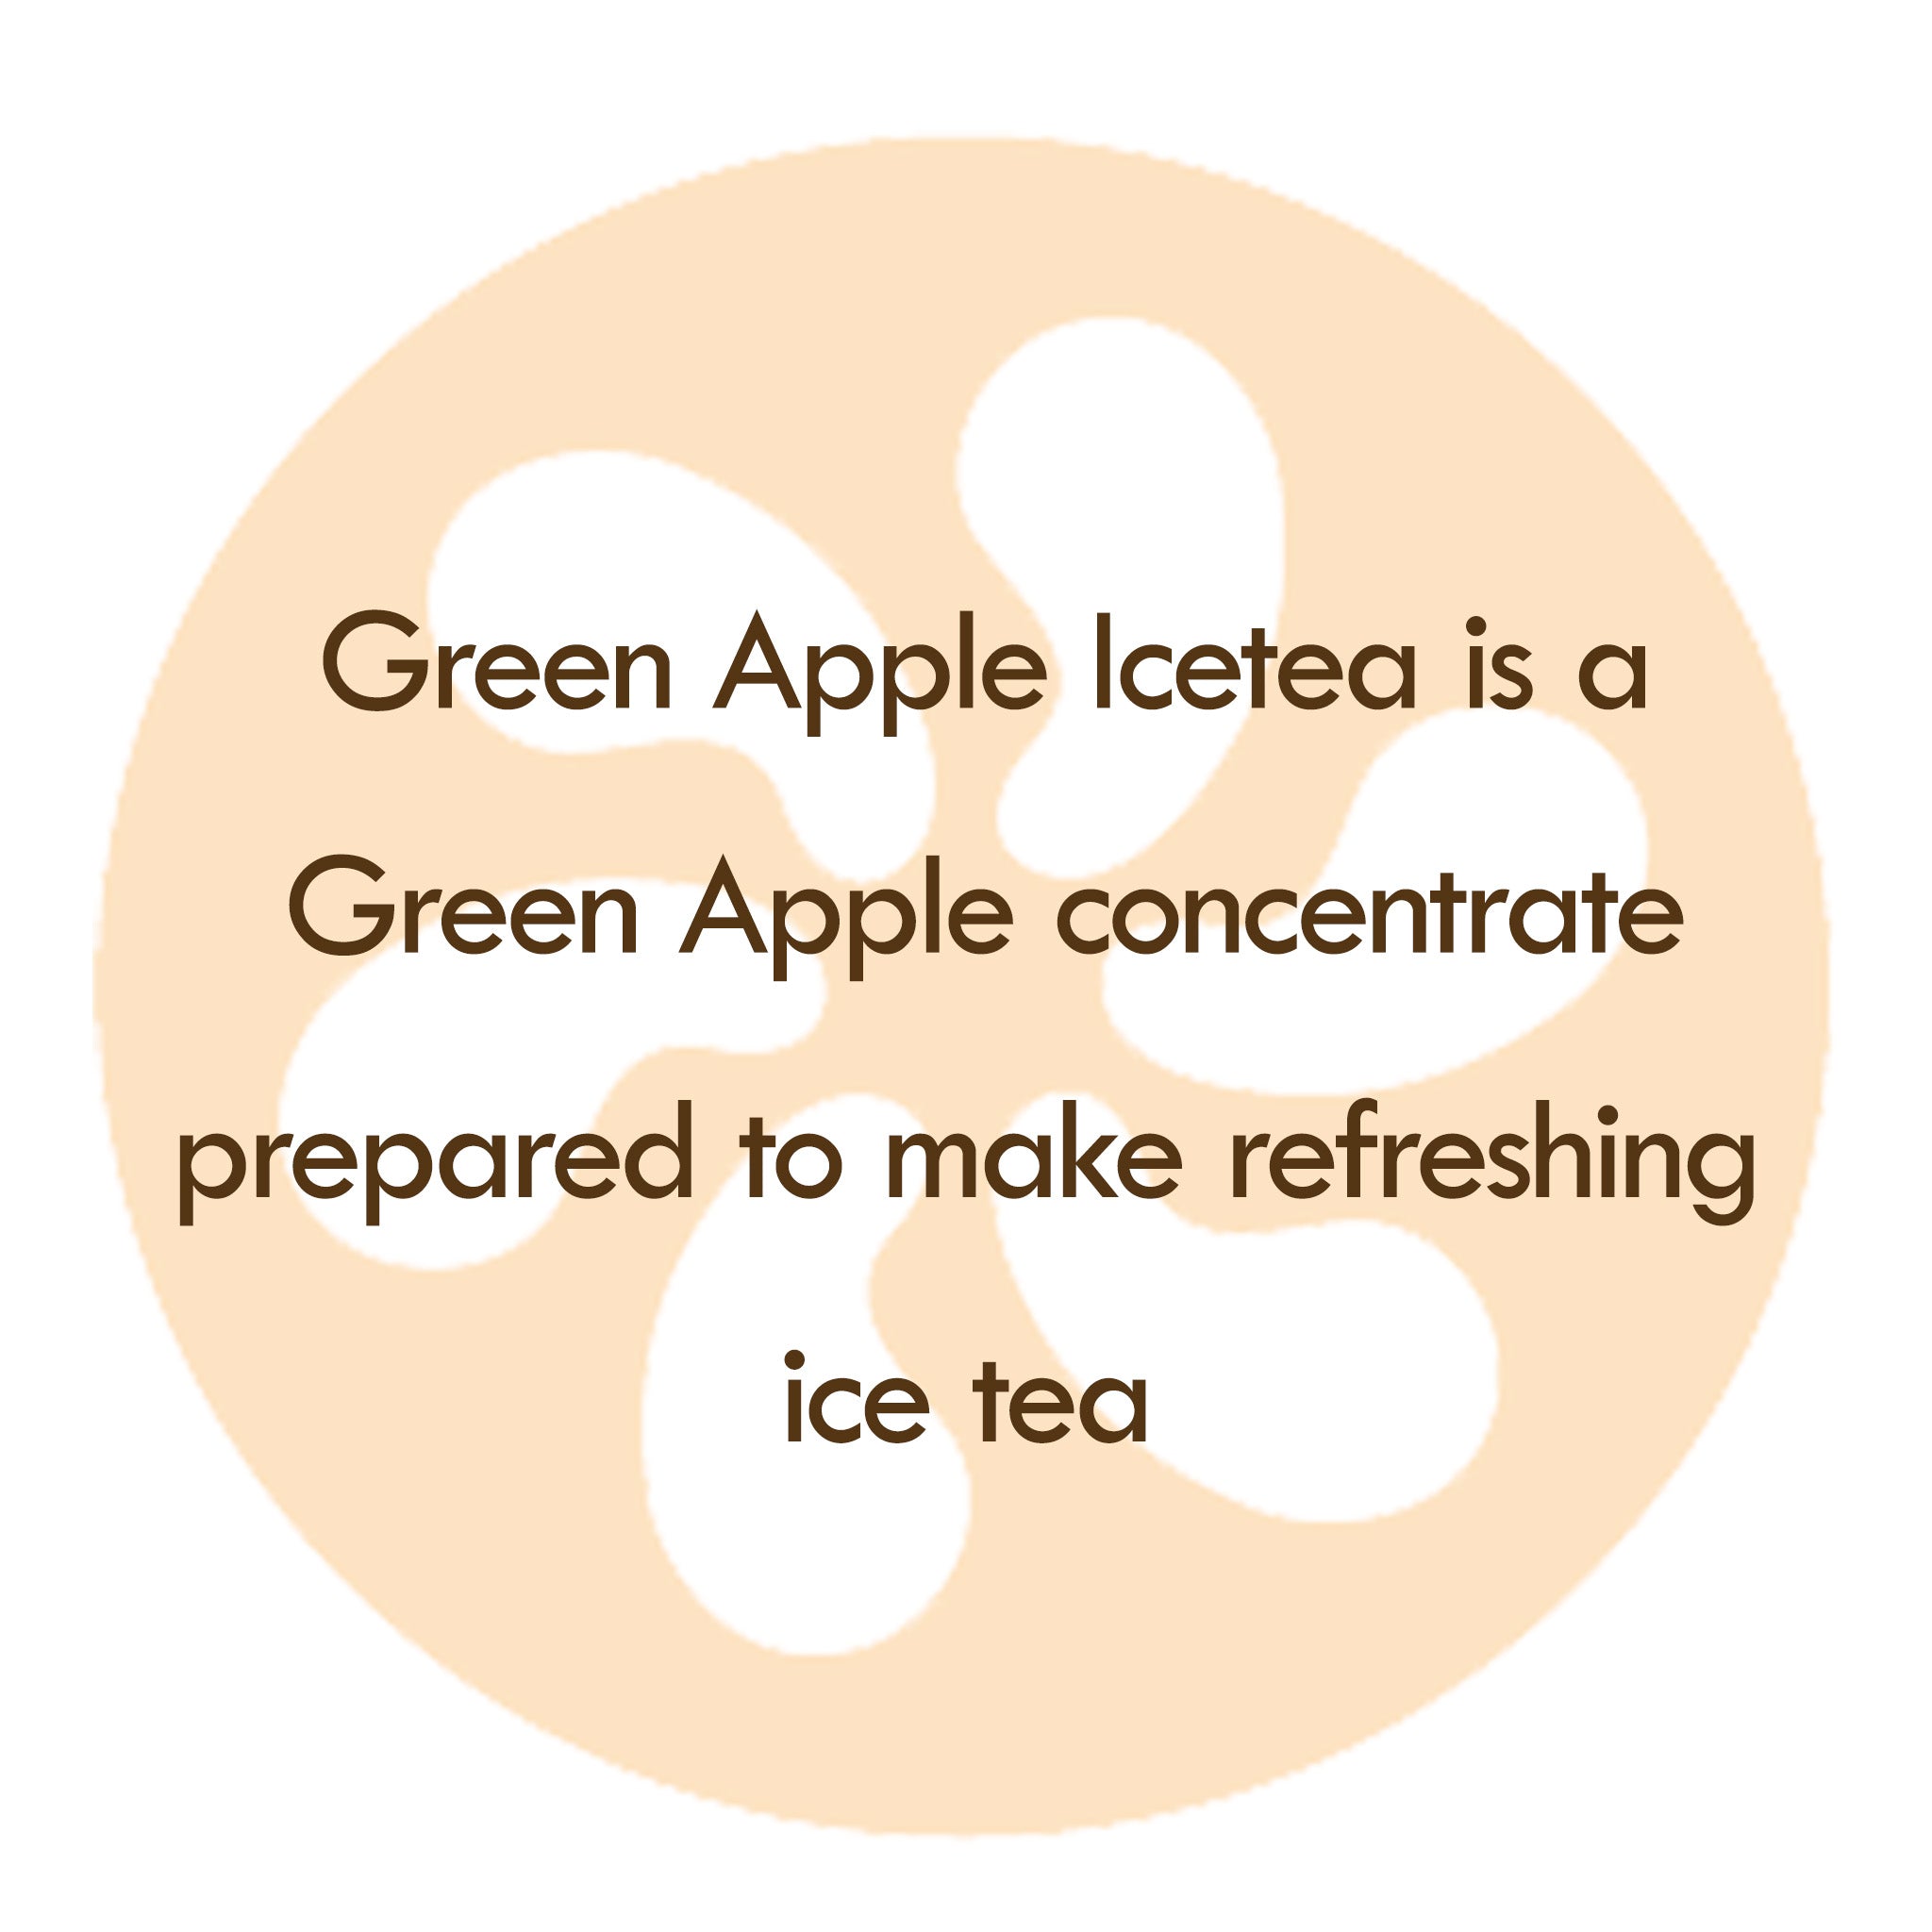 Our Green Apple Ice Tea Mocktail is a concentrate of Green Apple to make refreshing ice tea.